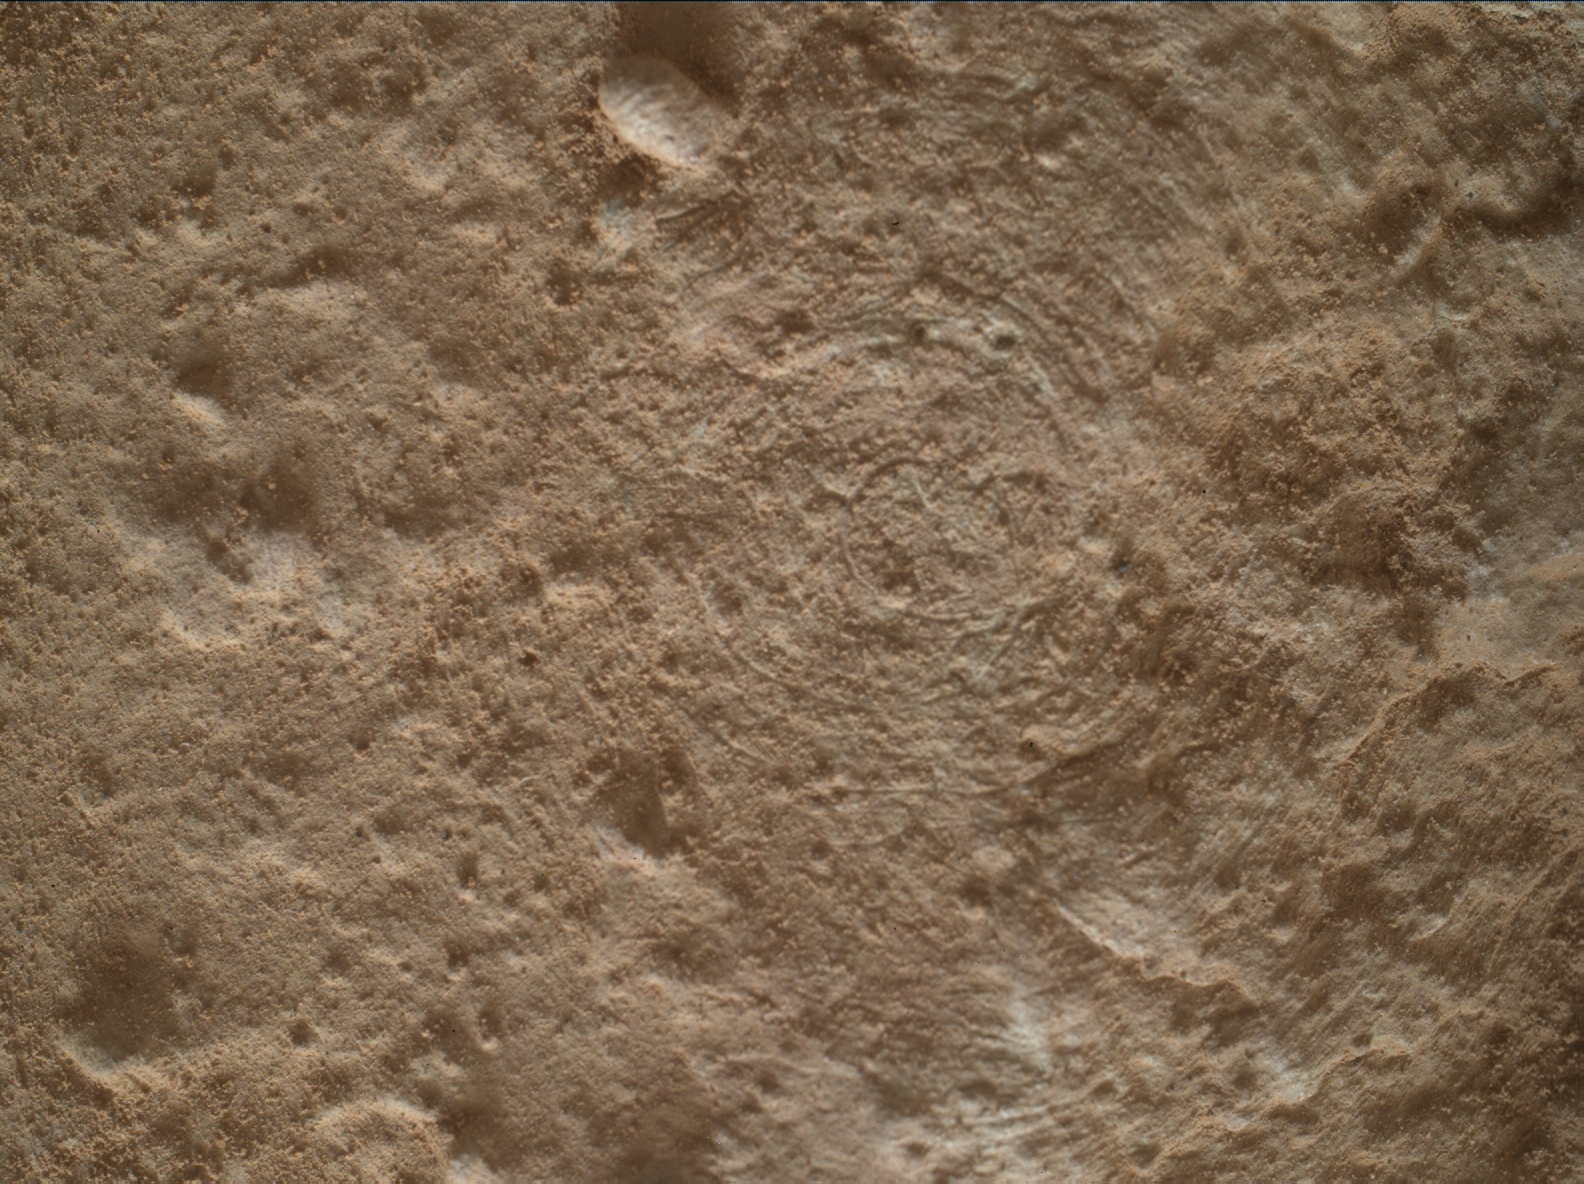 Nasa's Mars rover Curiosity acquired this image using its Mars Hand Lens Imager (MAHLI) on Sol 2801